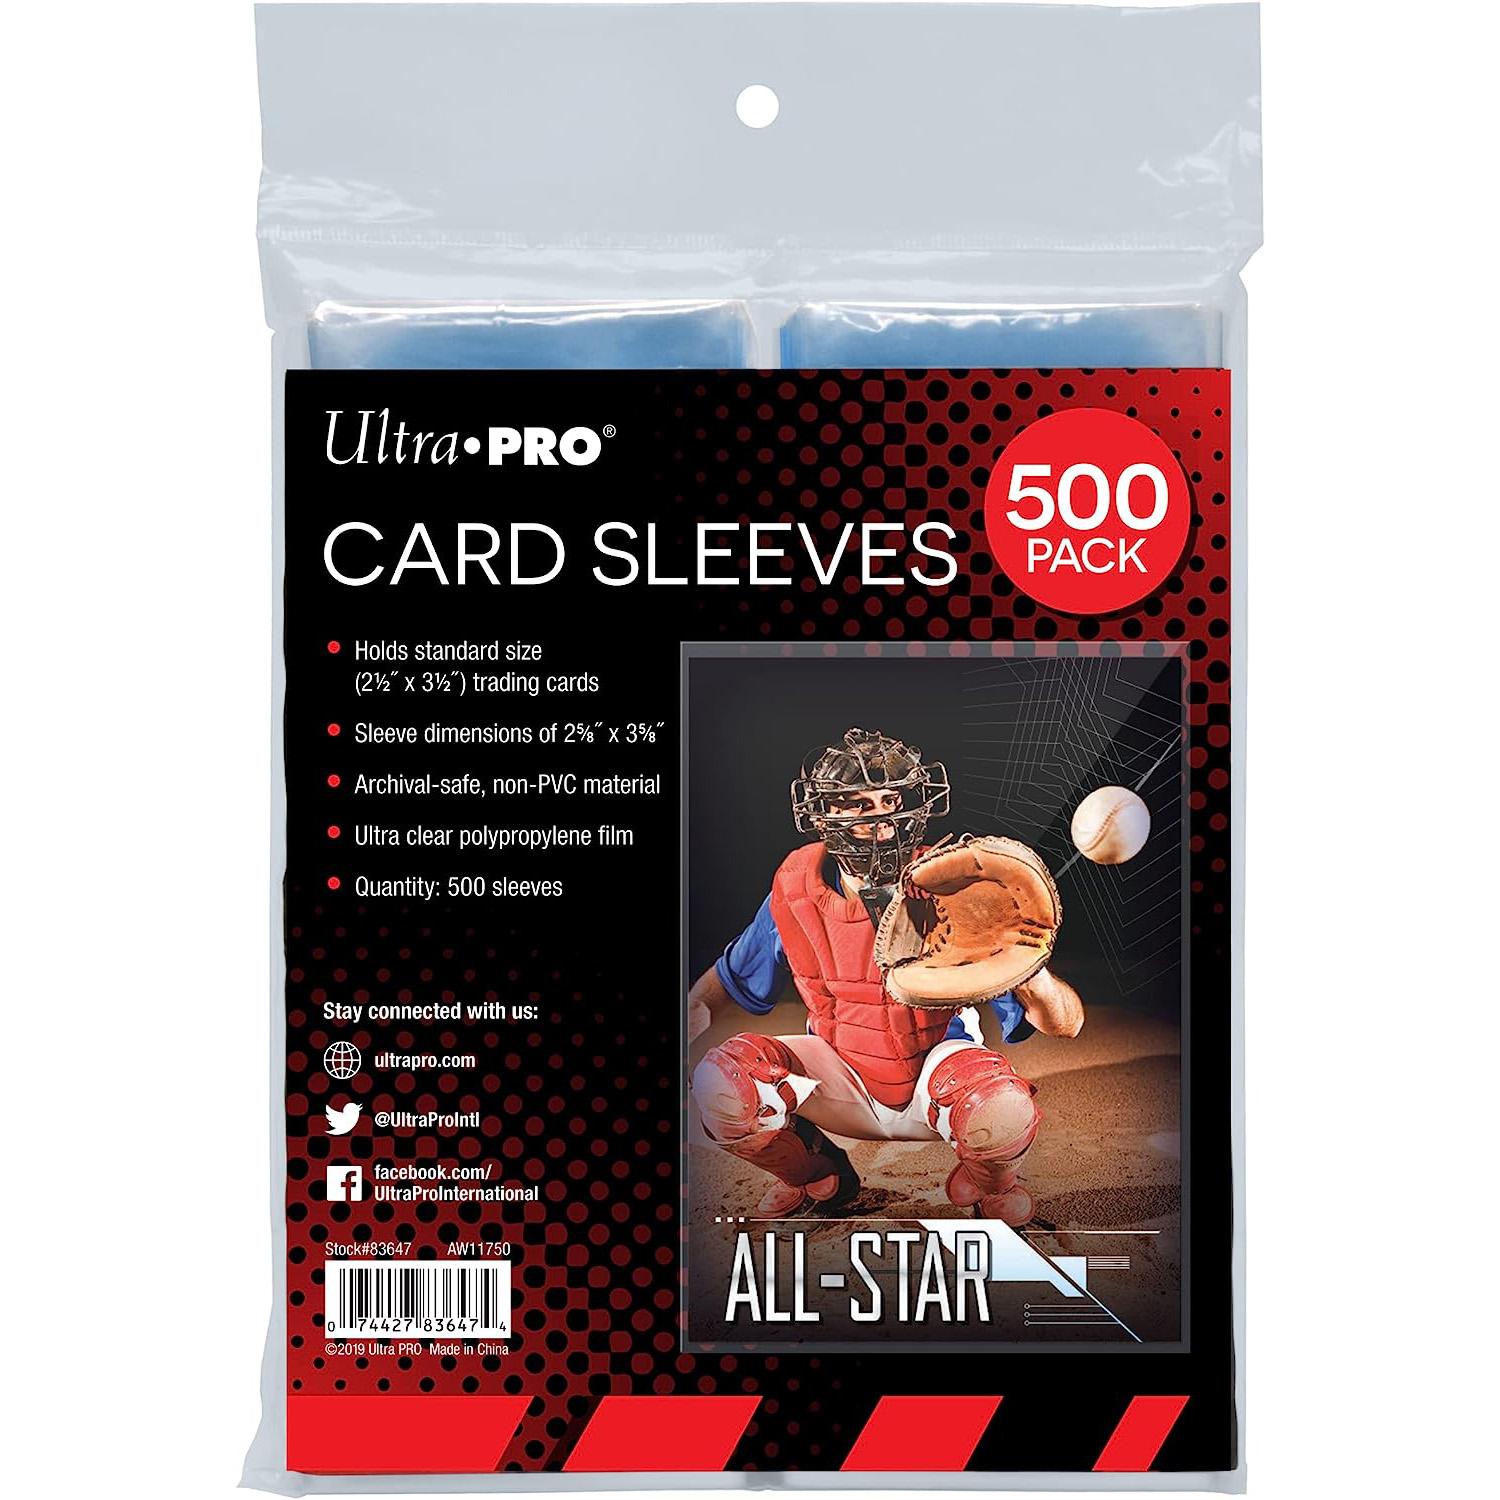 Ultra PRO Standard Size Trading Card Sleeves 500 Pack for $4.79